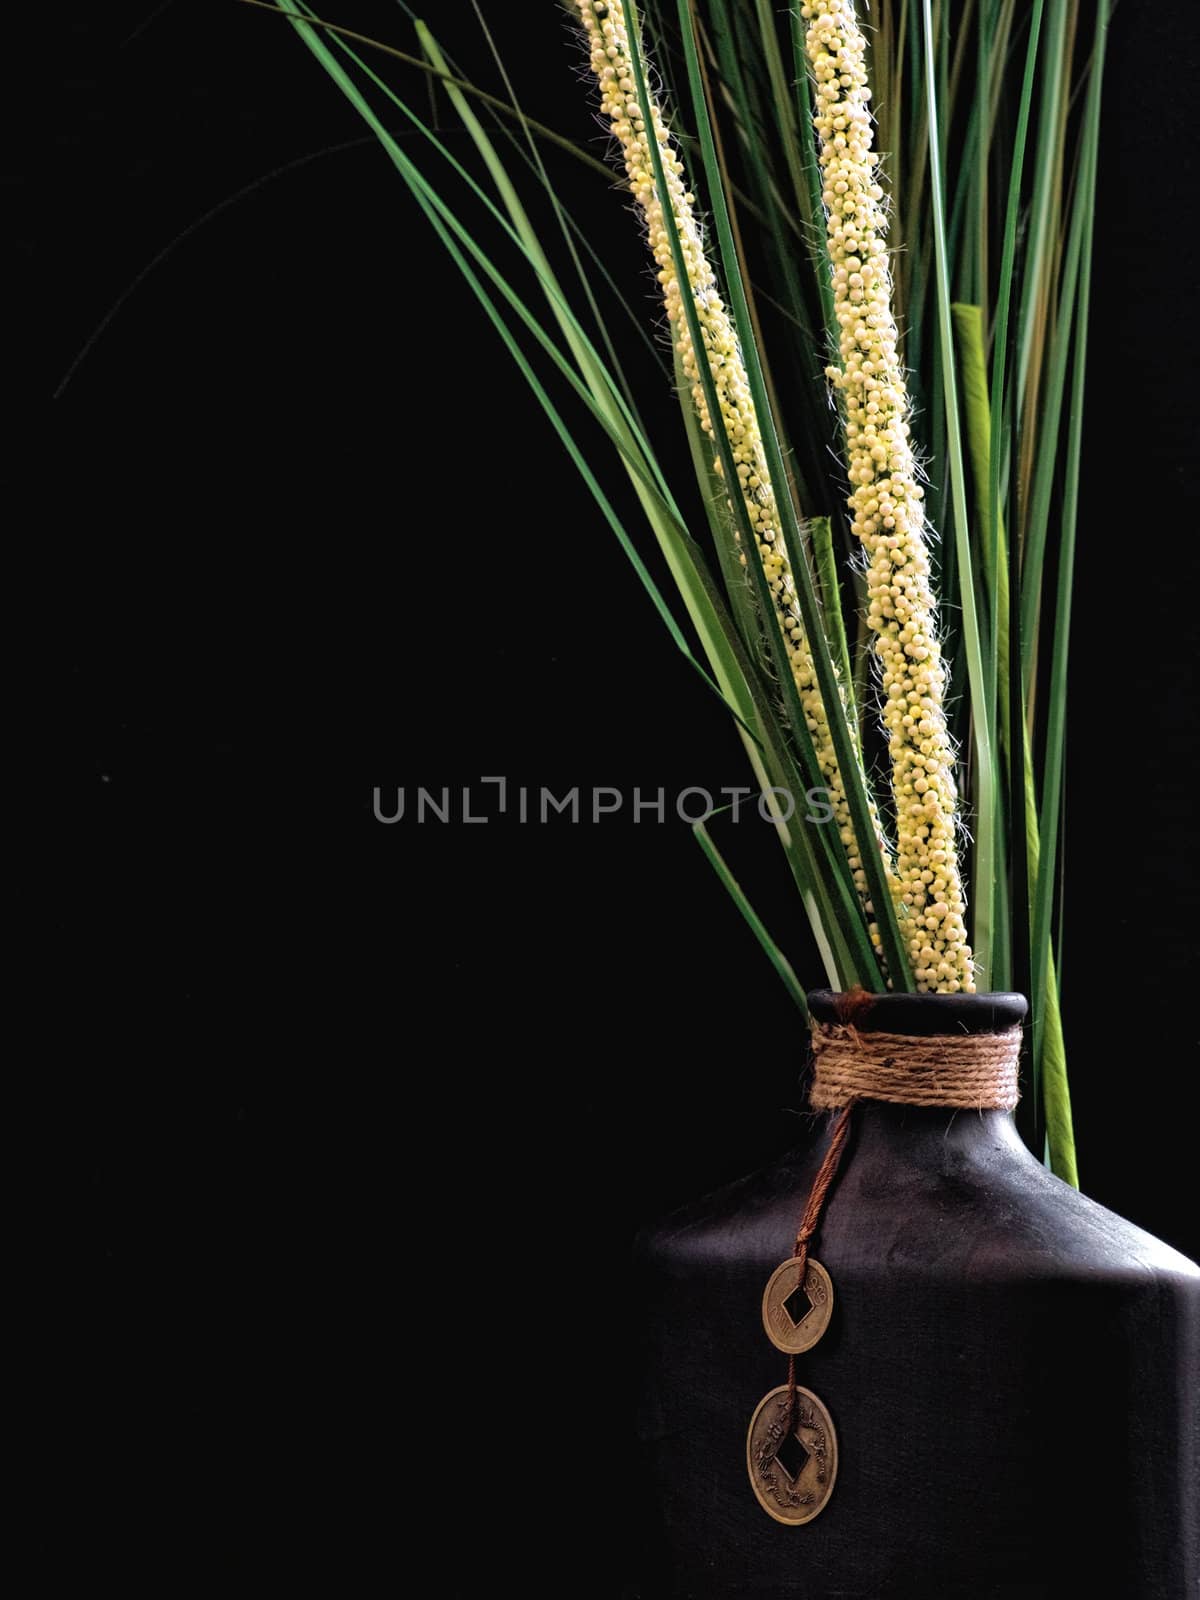 Oriental Vase with assorted grasses on a black background.